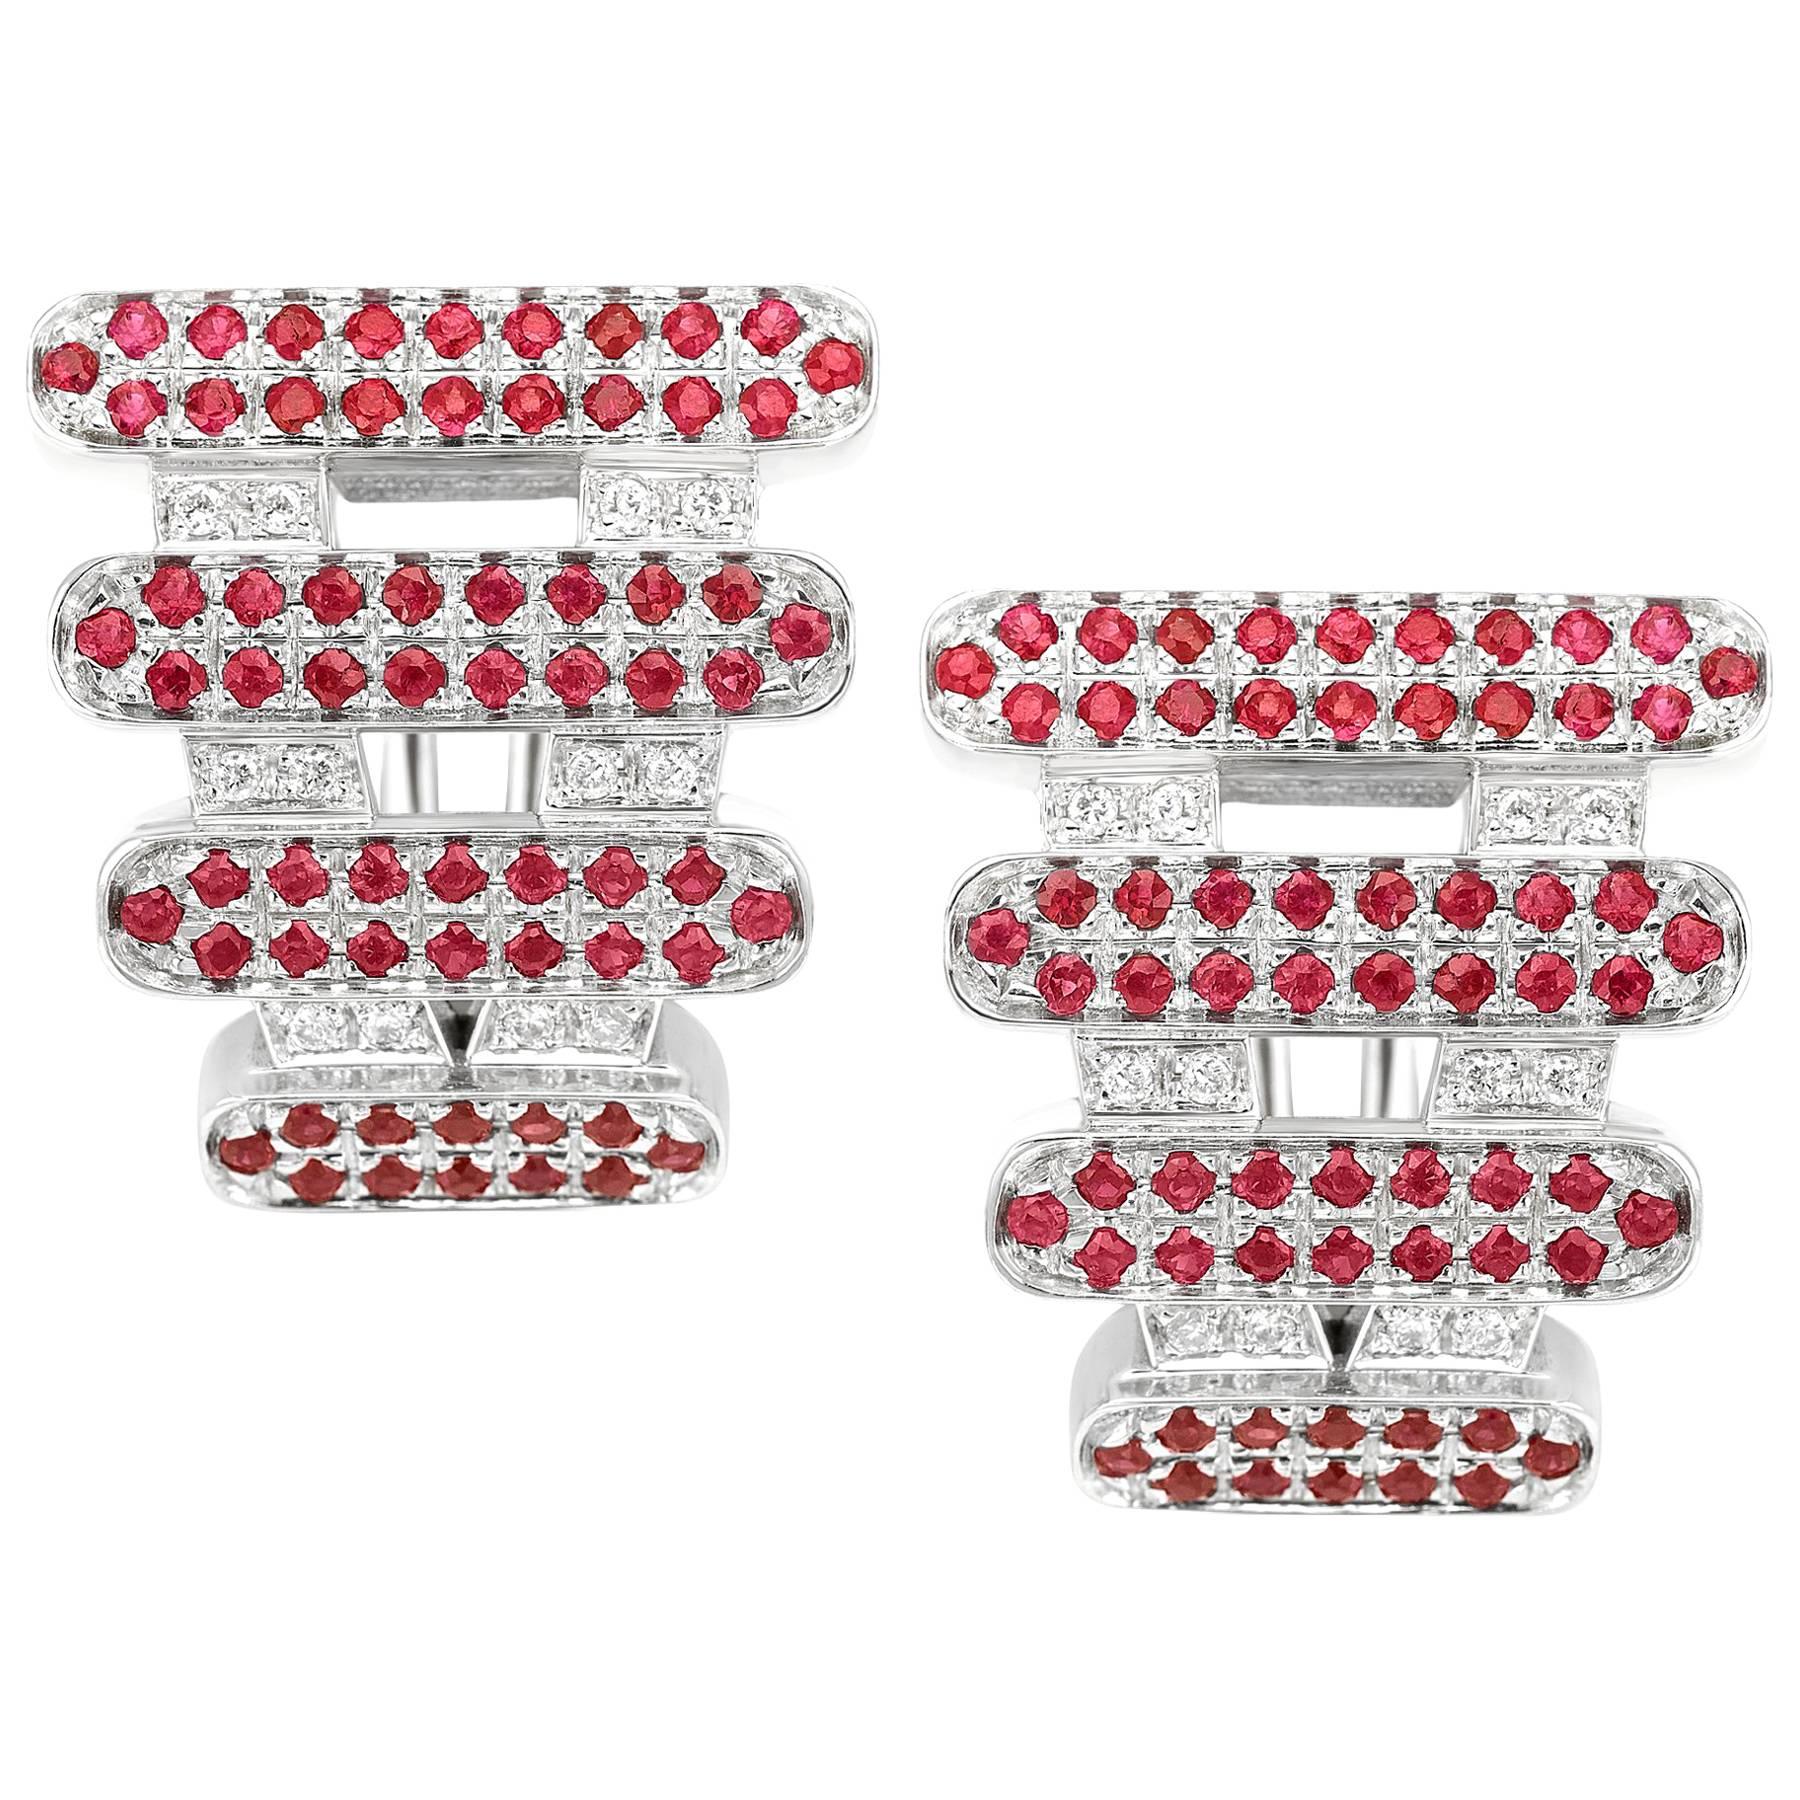 Earrings Collection "Moonlight" 18 Karat White Gold Ruby and White Diamonds For Sale